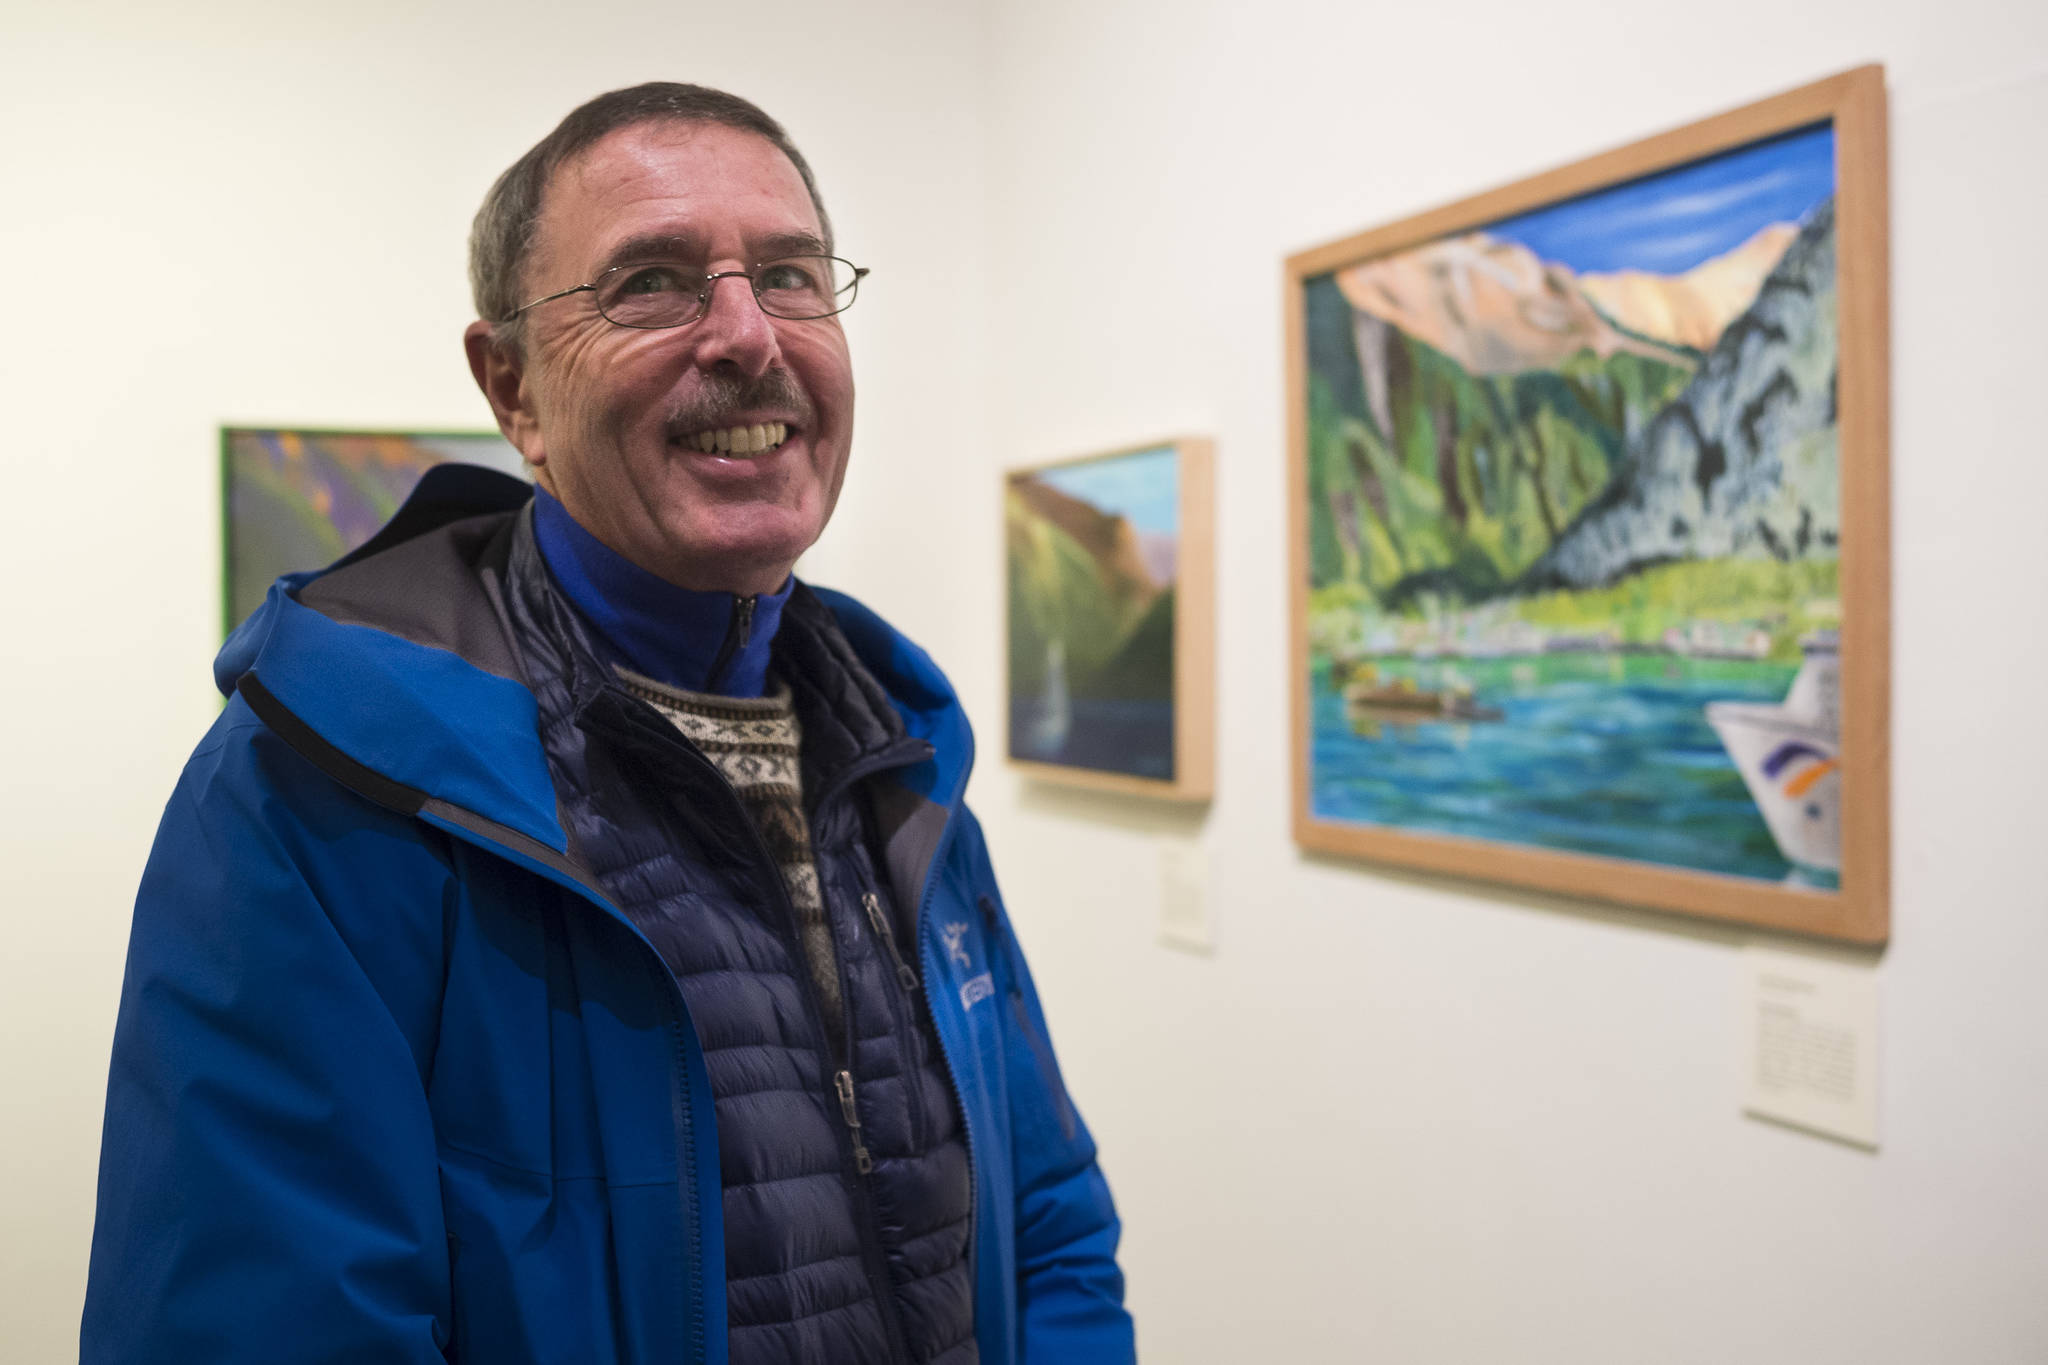 Tom Bornstein is one of 19 Plein Rein Painters inspired by Sydney Laurence at the Juneau-Douglas City Museum during Gallery Walk on Friday, Dec. 7, 2018. (Michael Penn | Juneau Empire)